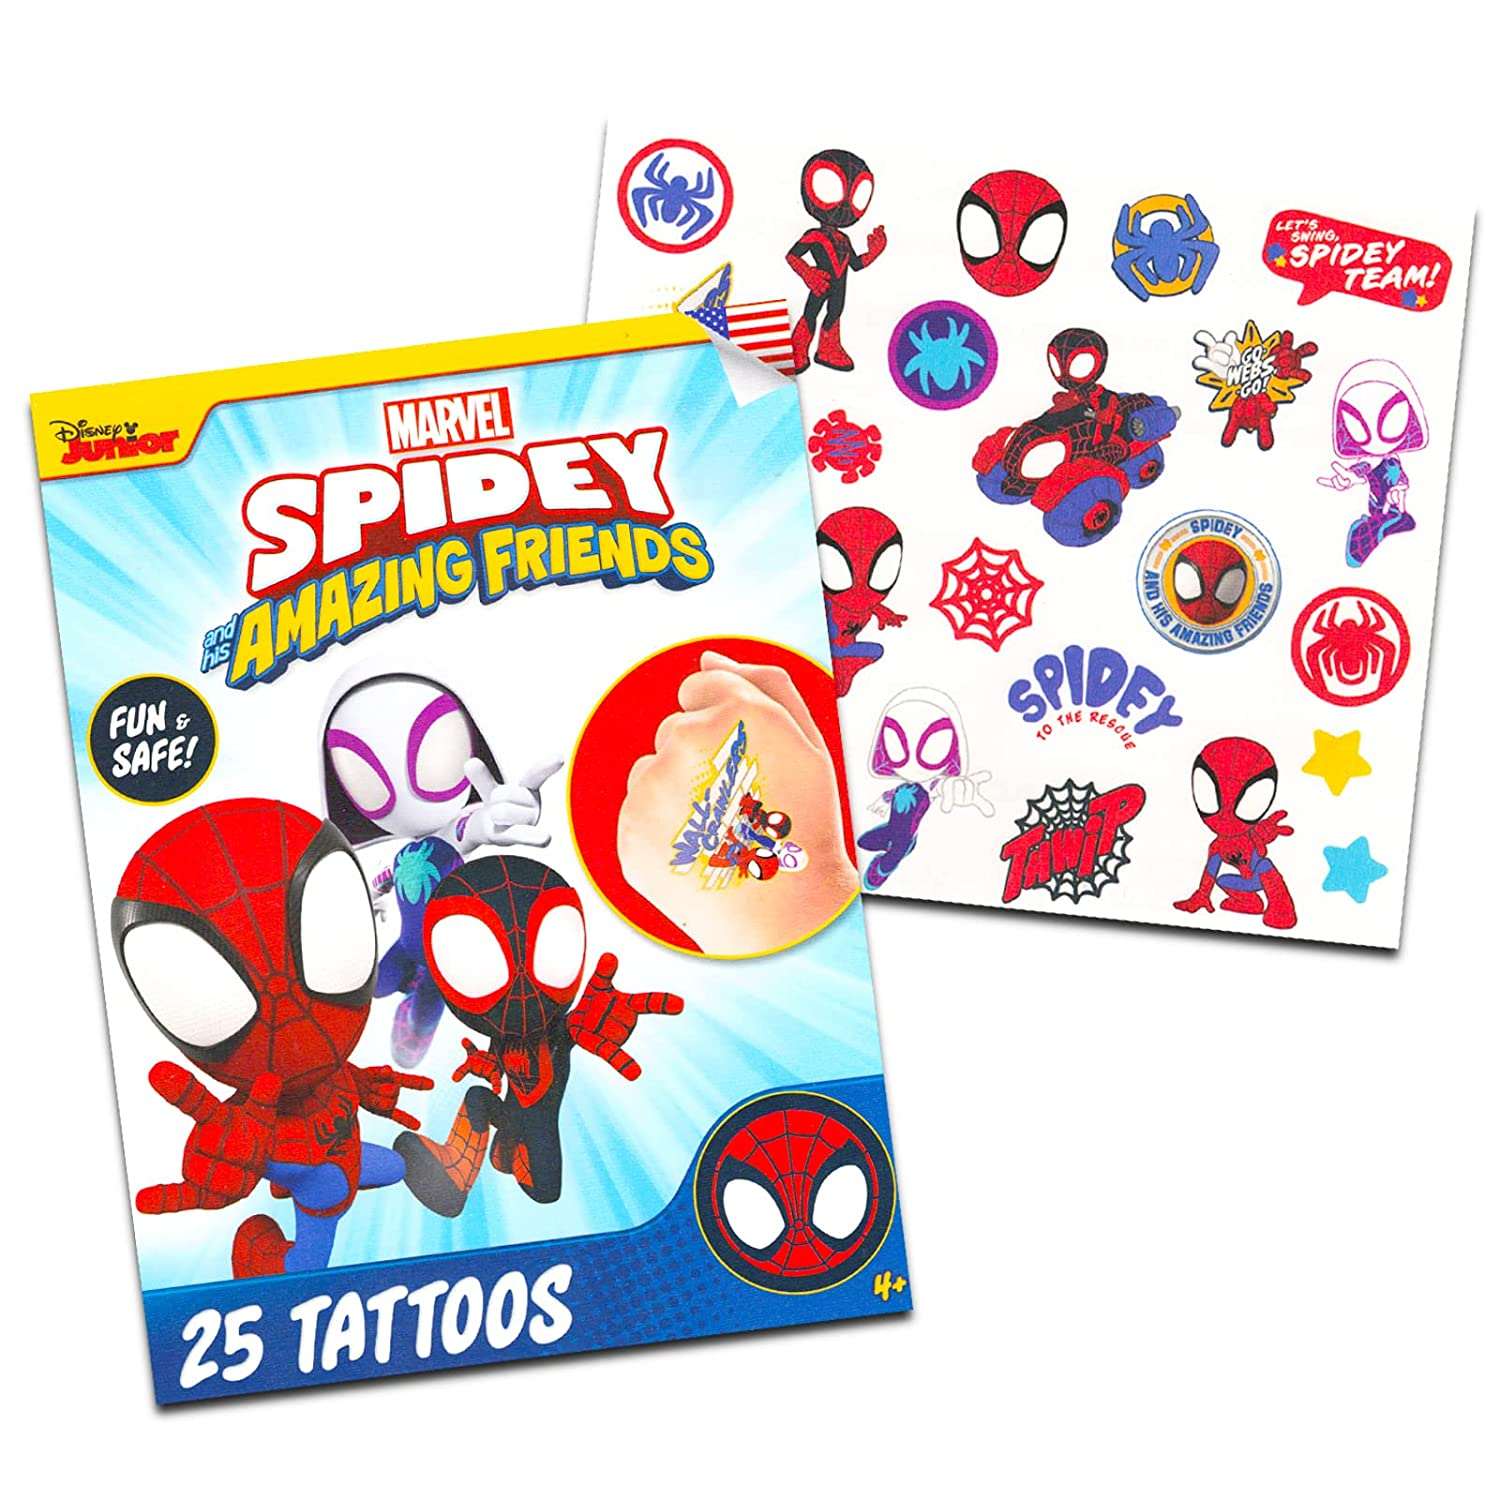 Disney Mickey And Friends Stickers is the best way to keep your